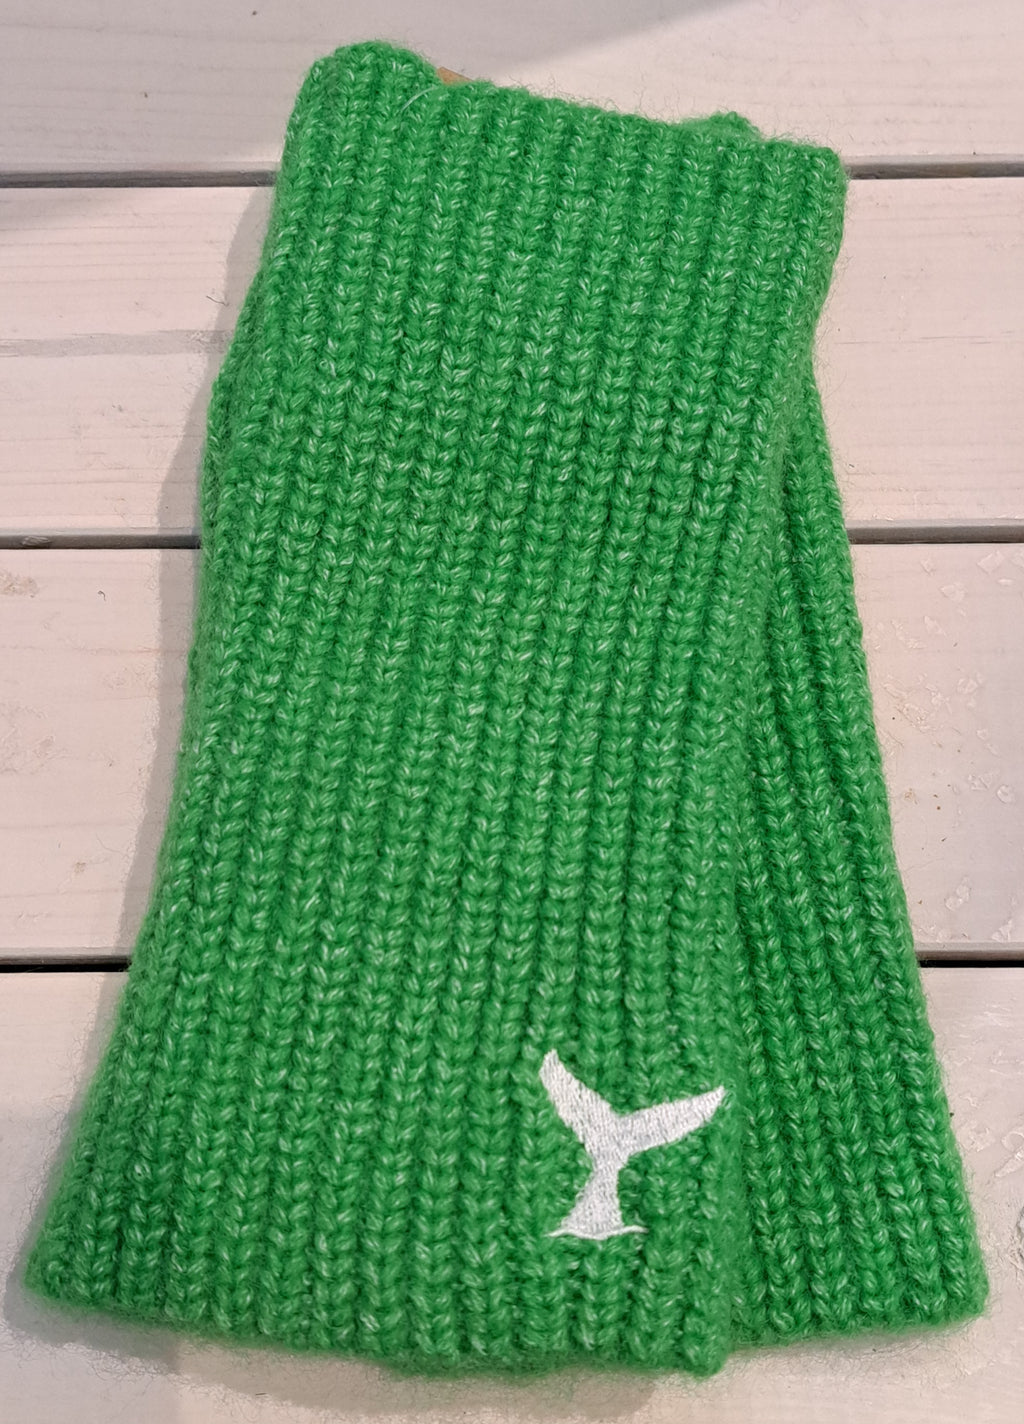 Wrist Warmers with Whale Tail Embroidery